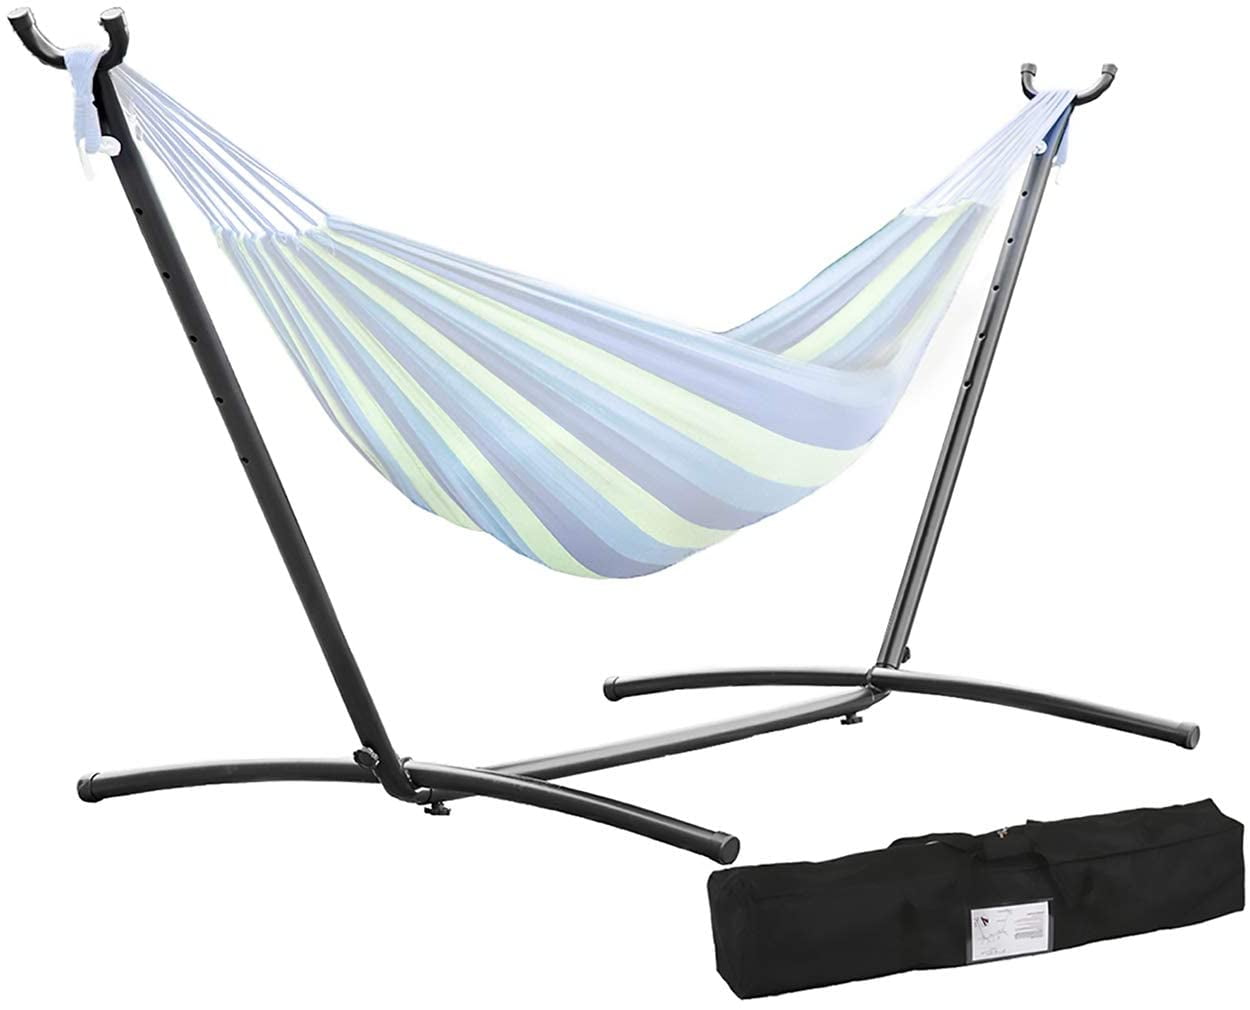 Details about   Hammock Stand With Space Saving Steel Stand Includes Carrying Case Blue TM32 